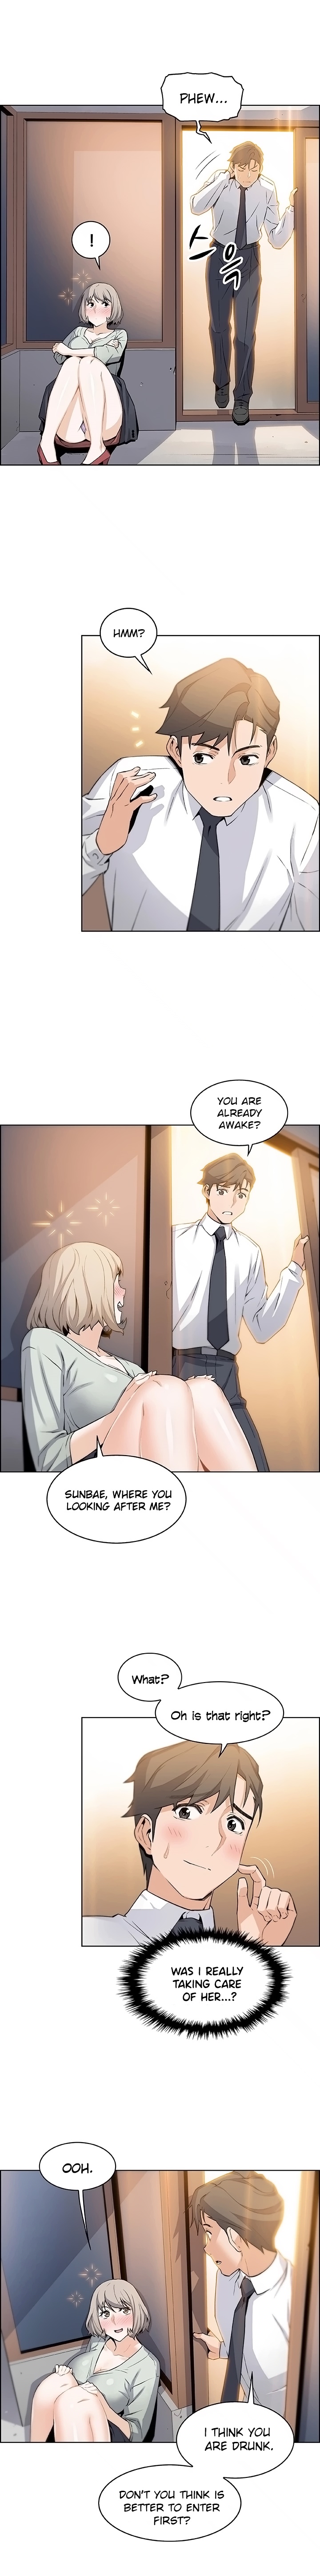 Housekeeper Manhwa - Chapter 16 Page 4